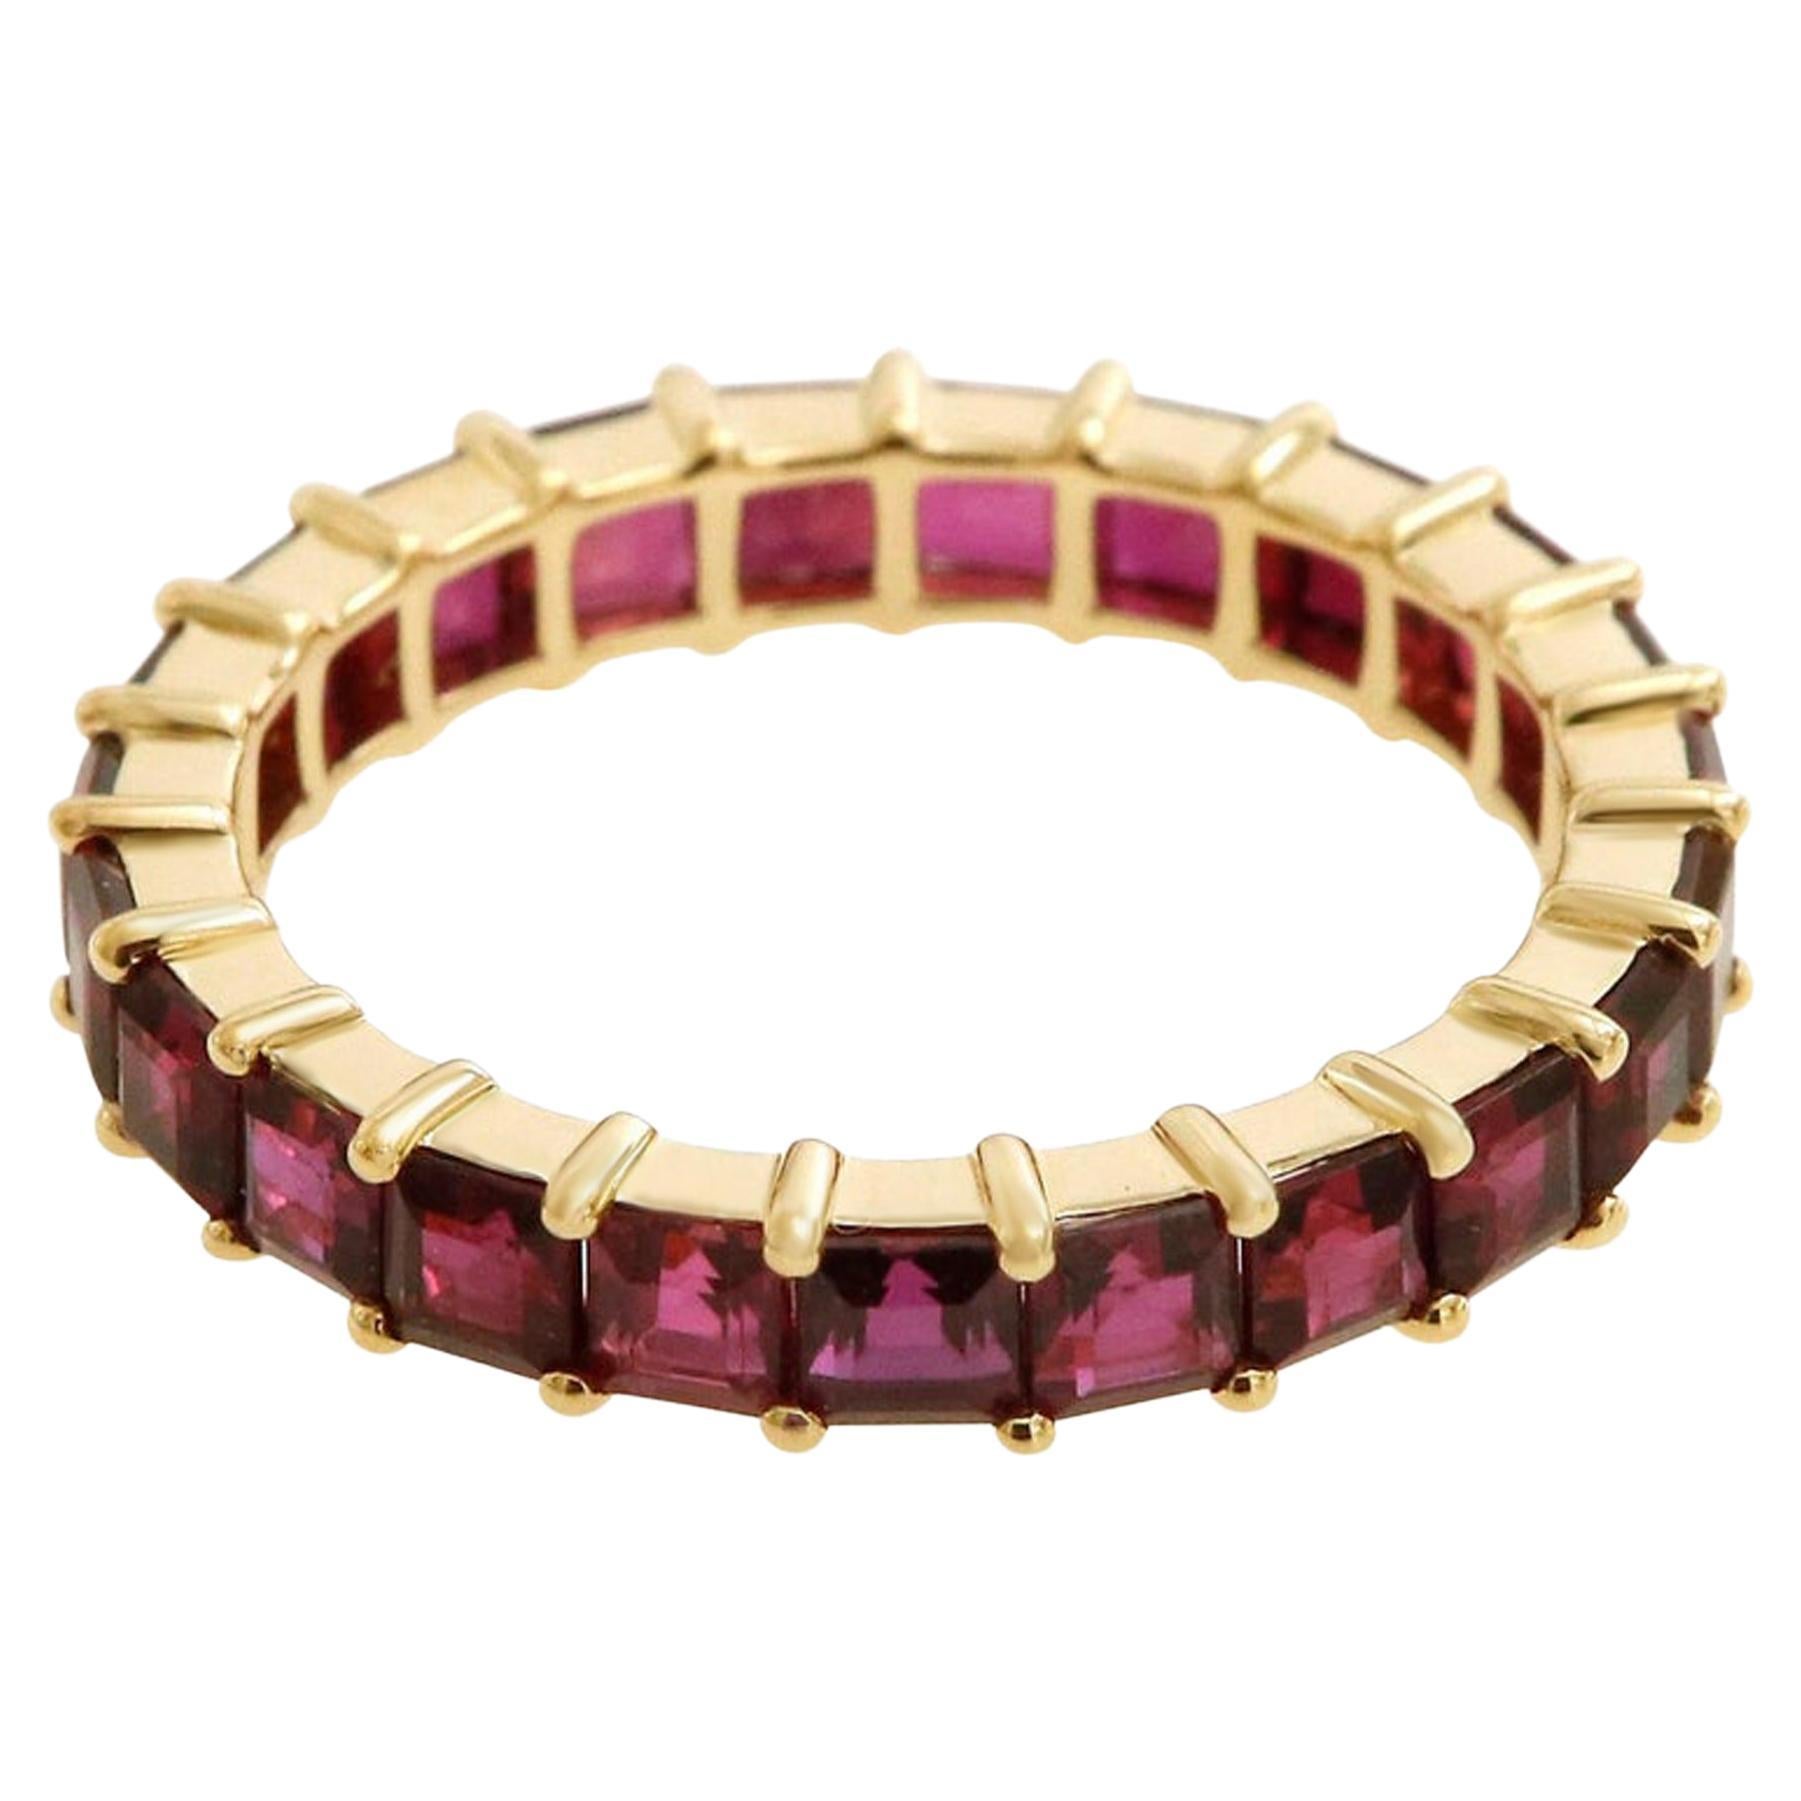 4.16 Carat Square Cut Ruby Eternity Band in 18 Karat Yellow Gold